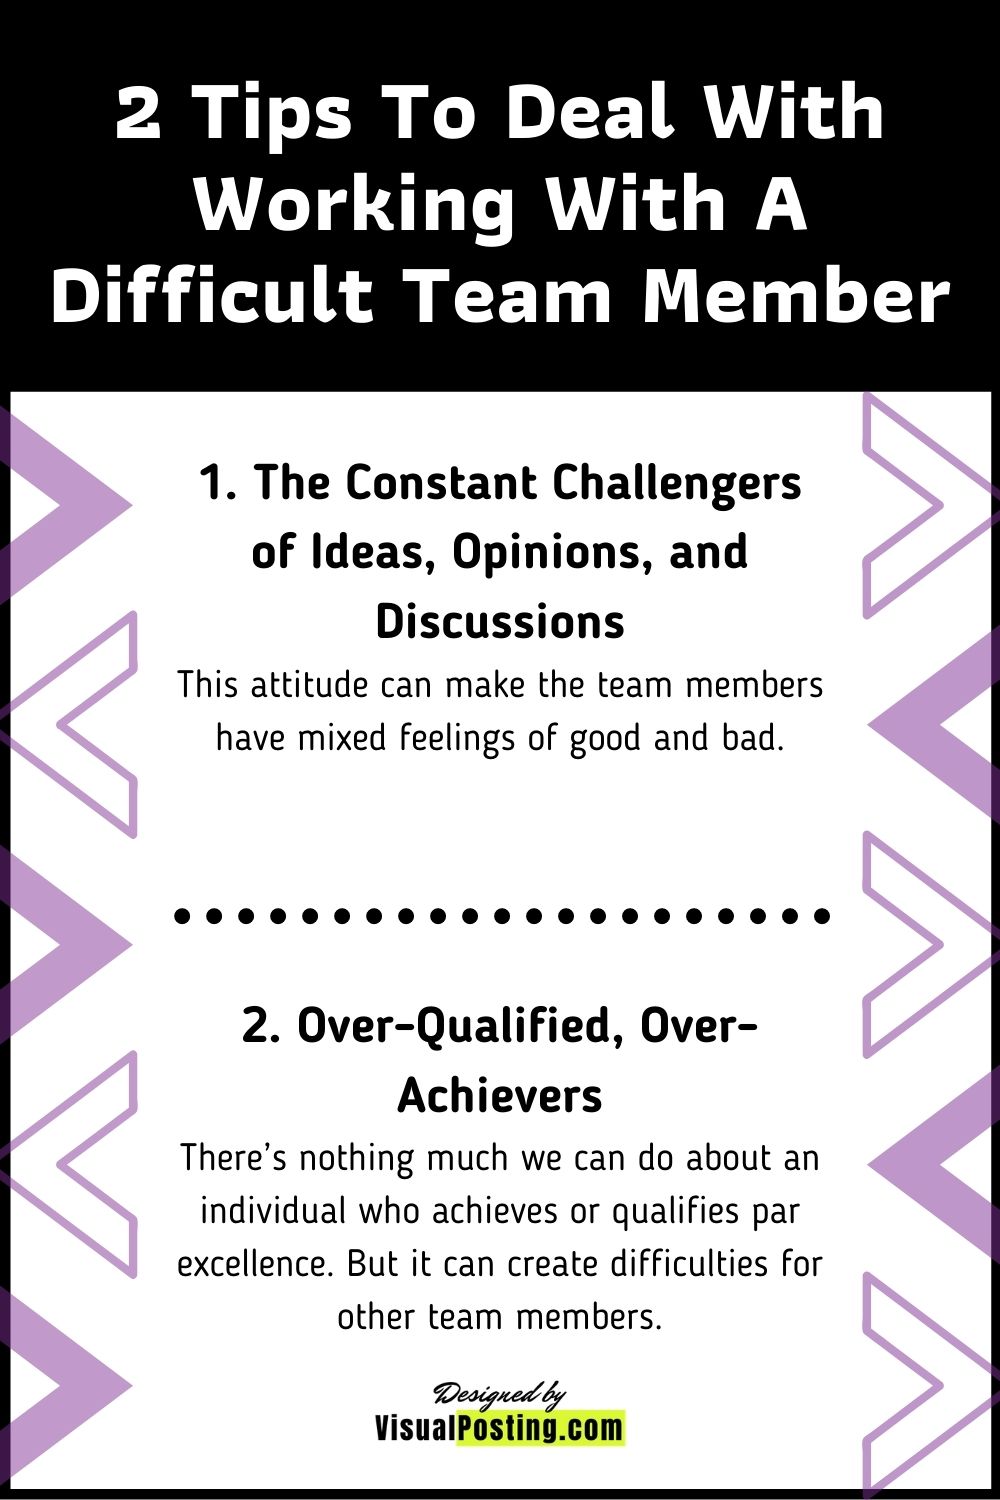 2 Tips To Deal With Working With A Difficult Team Member.jpg